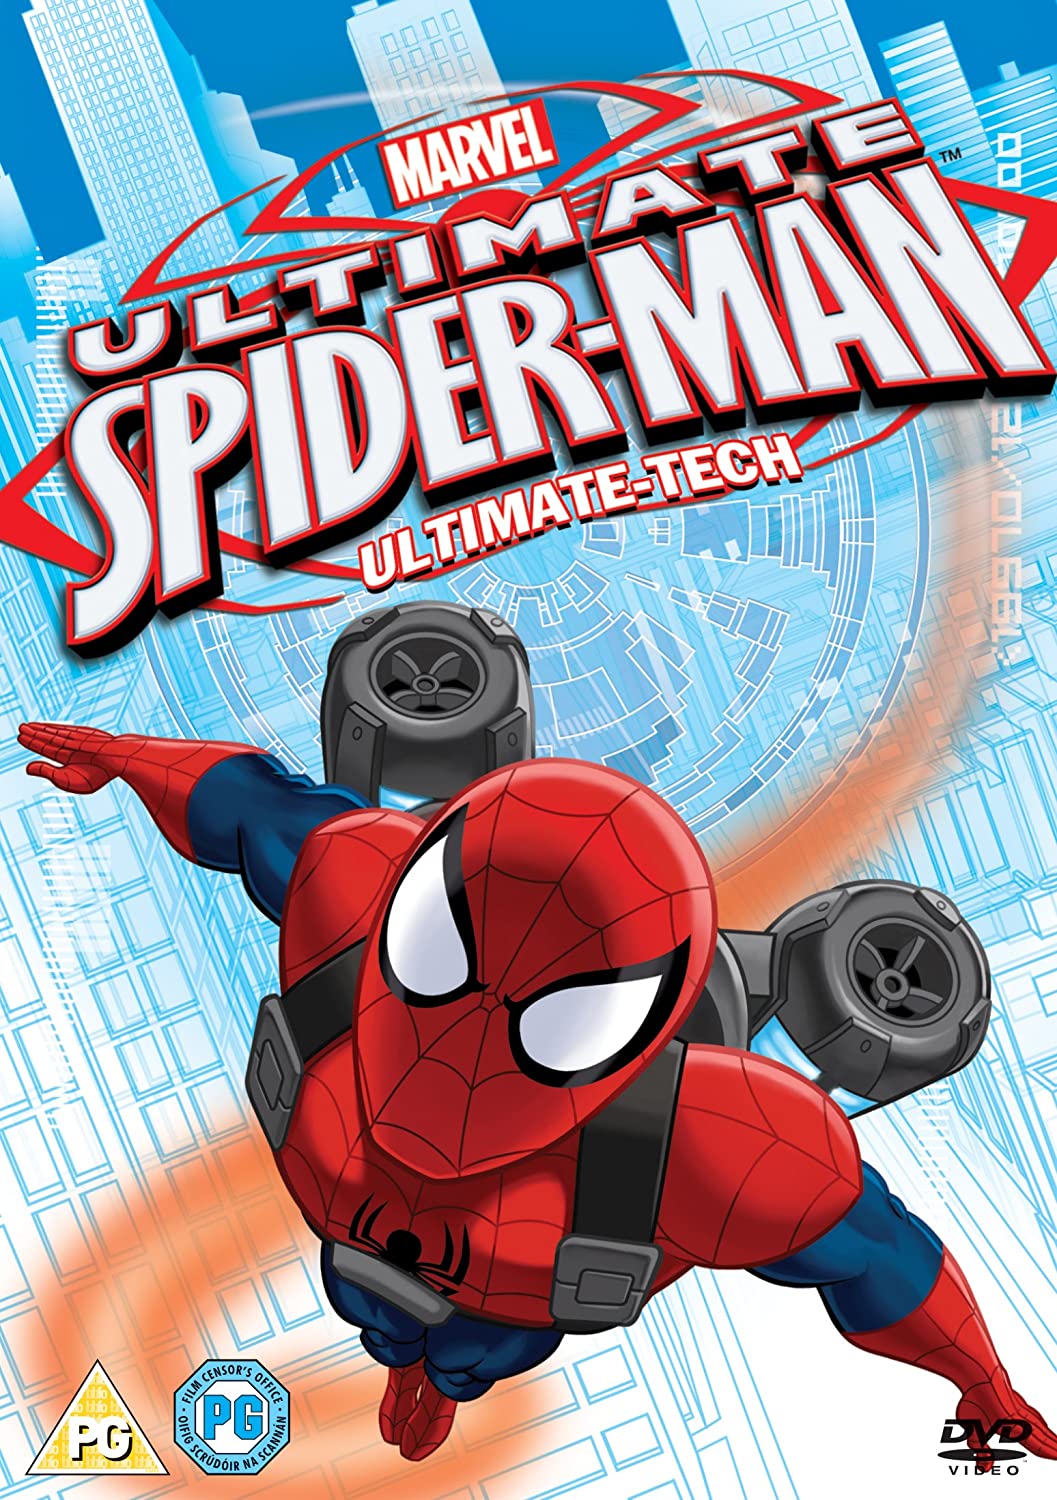 Ultimate Spider-Man: Volume 4 - Ultimate Tech